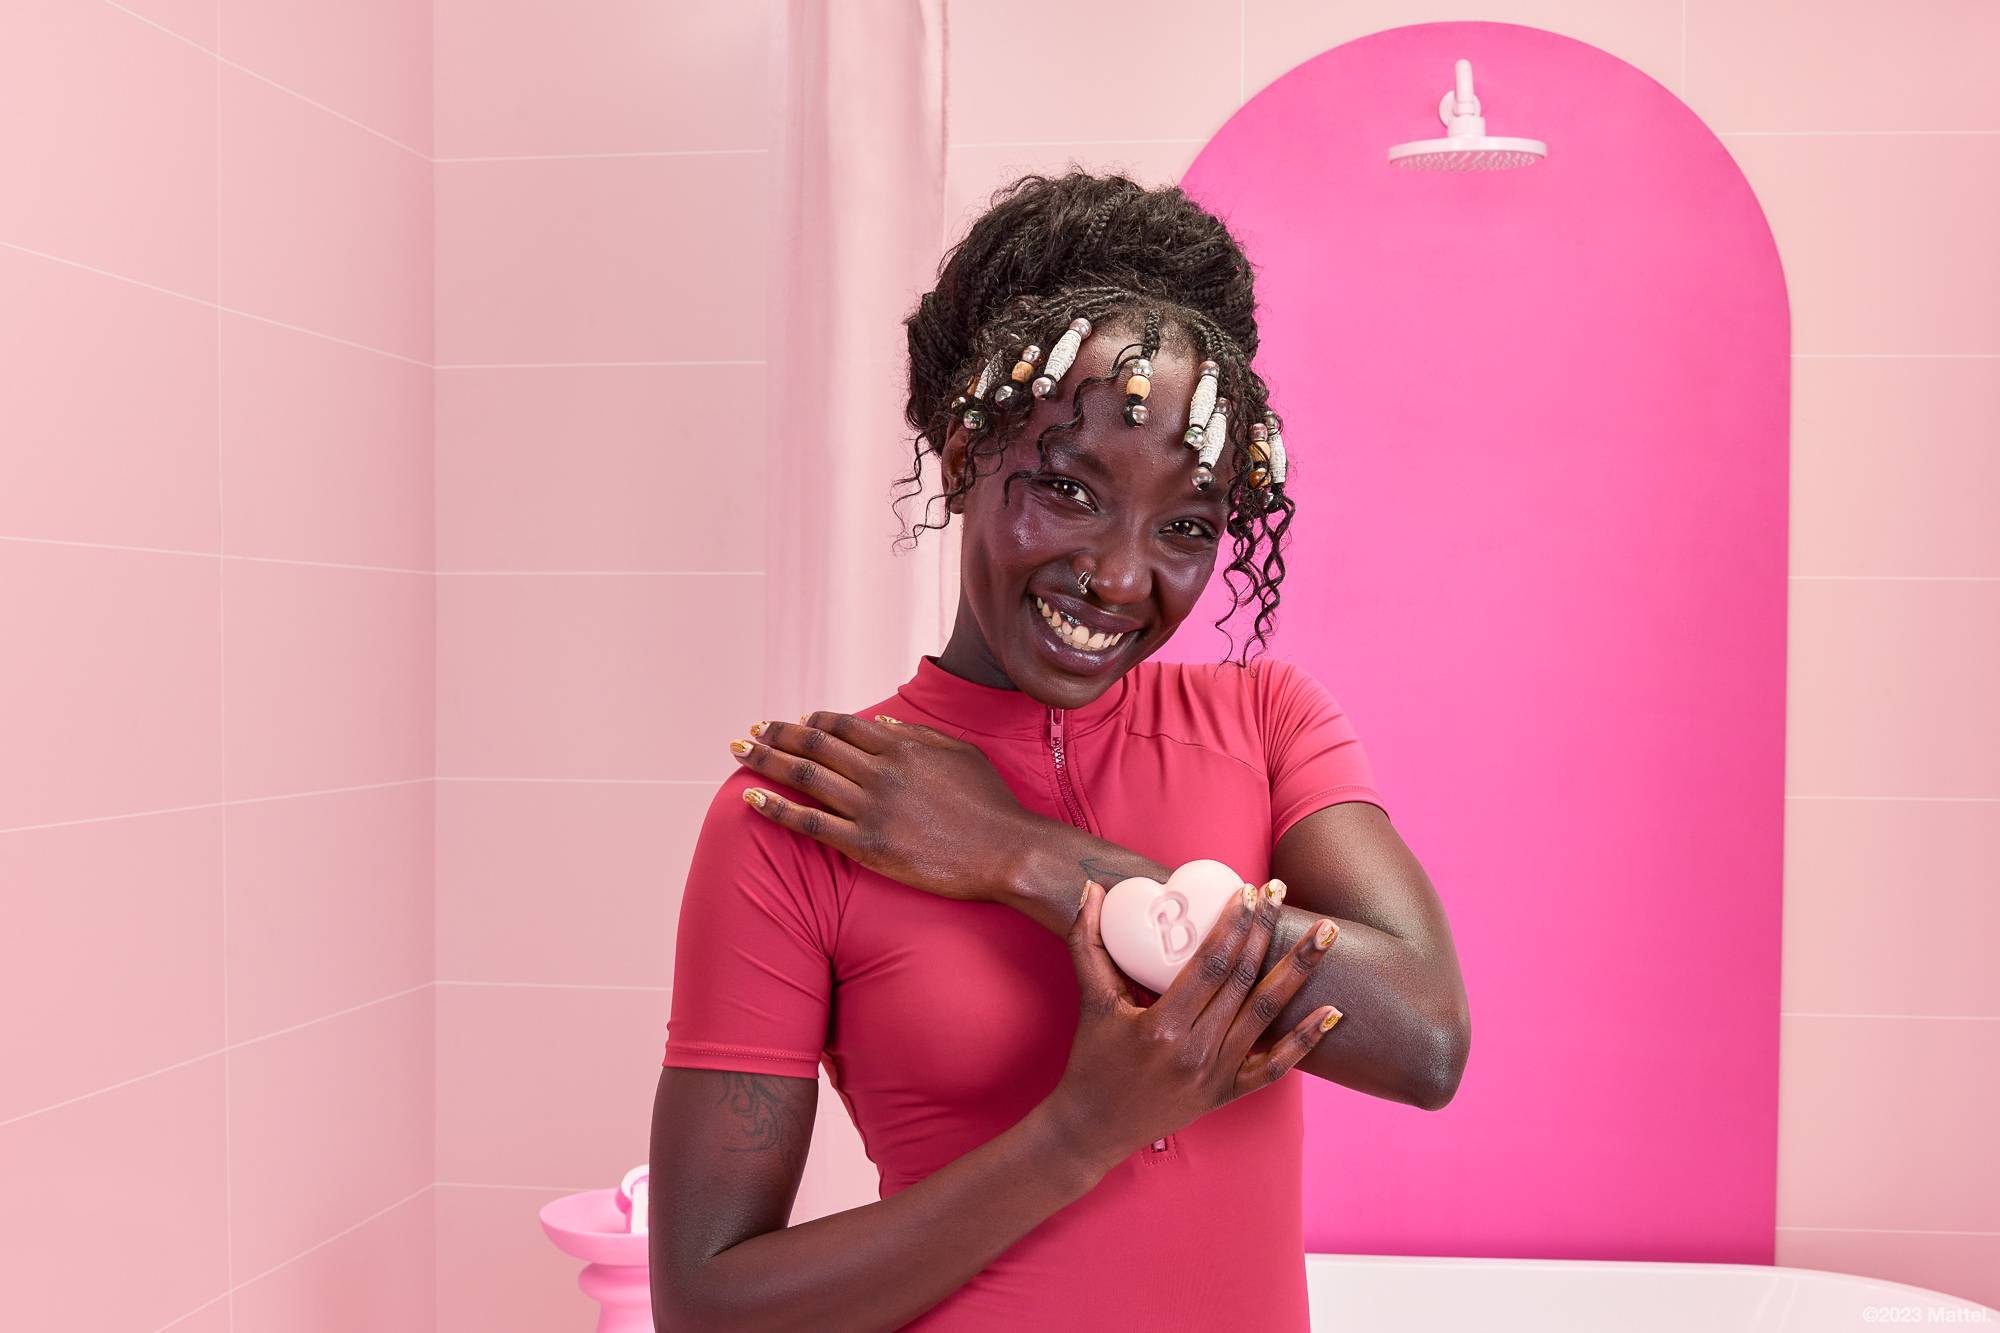 Model is in a pink bathroom. They are wearing a pink swimming costume and smiling as they soothe the body balm over their arm.